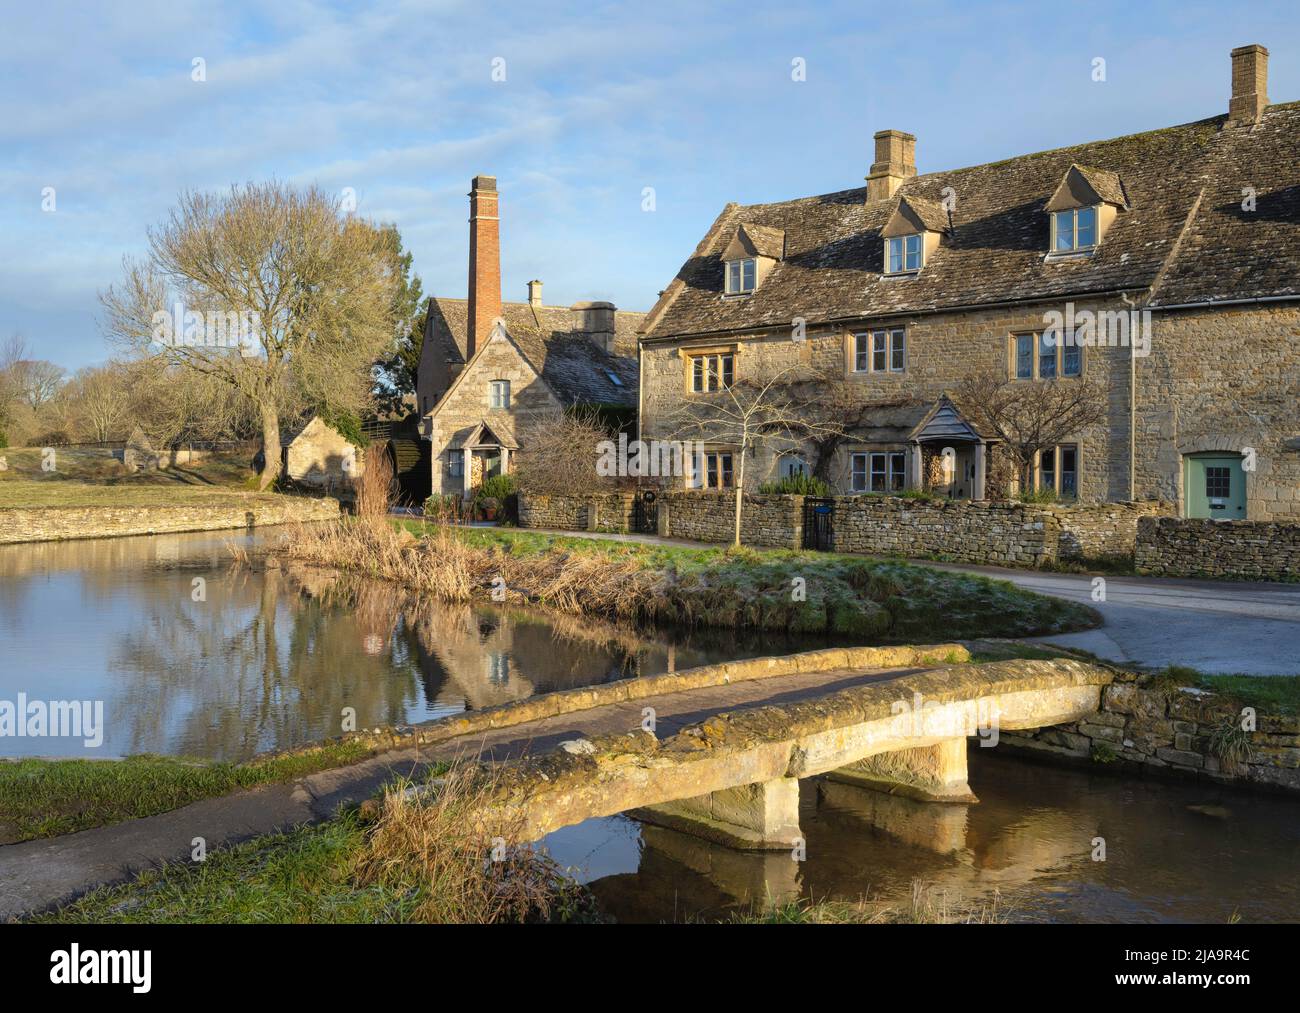 The old mill at Lower Slaughter, Cotswolds, Gloucestershire, England. Stock Photo